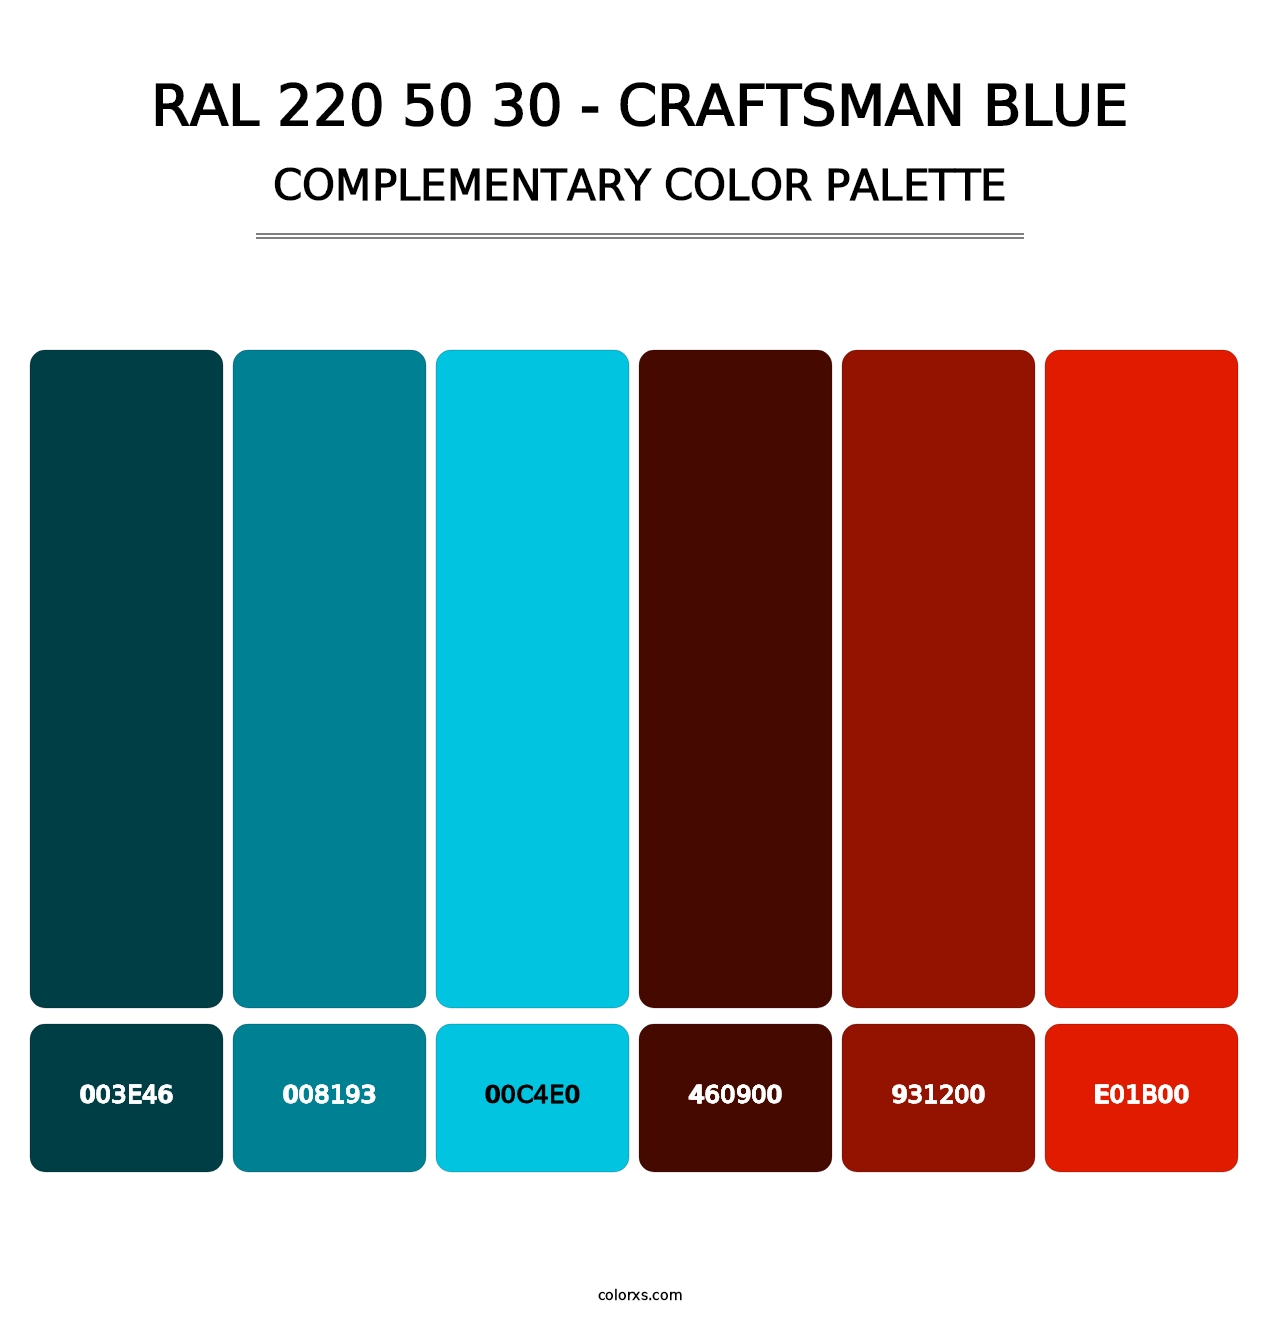 RAL 220 50 30 - Craftsman Blue - Complementary Color Palette